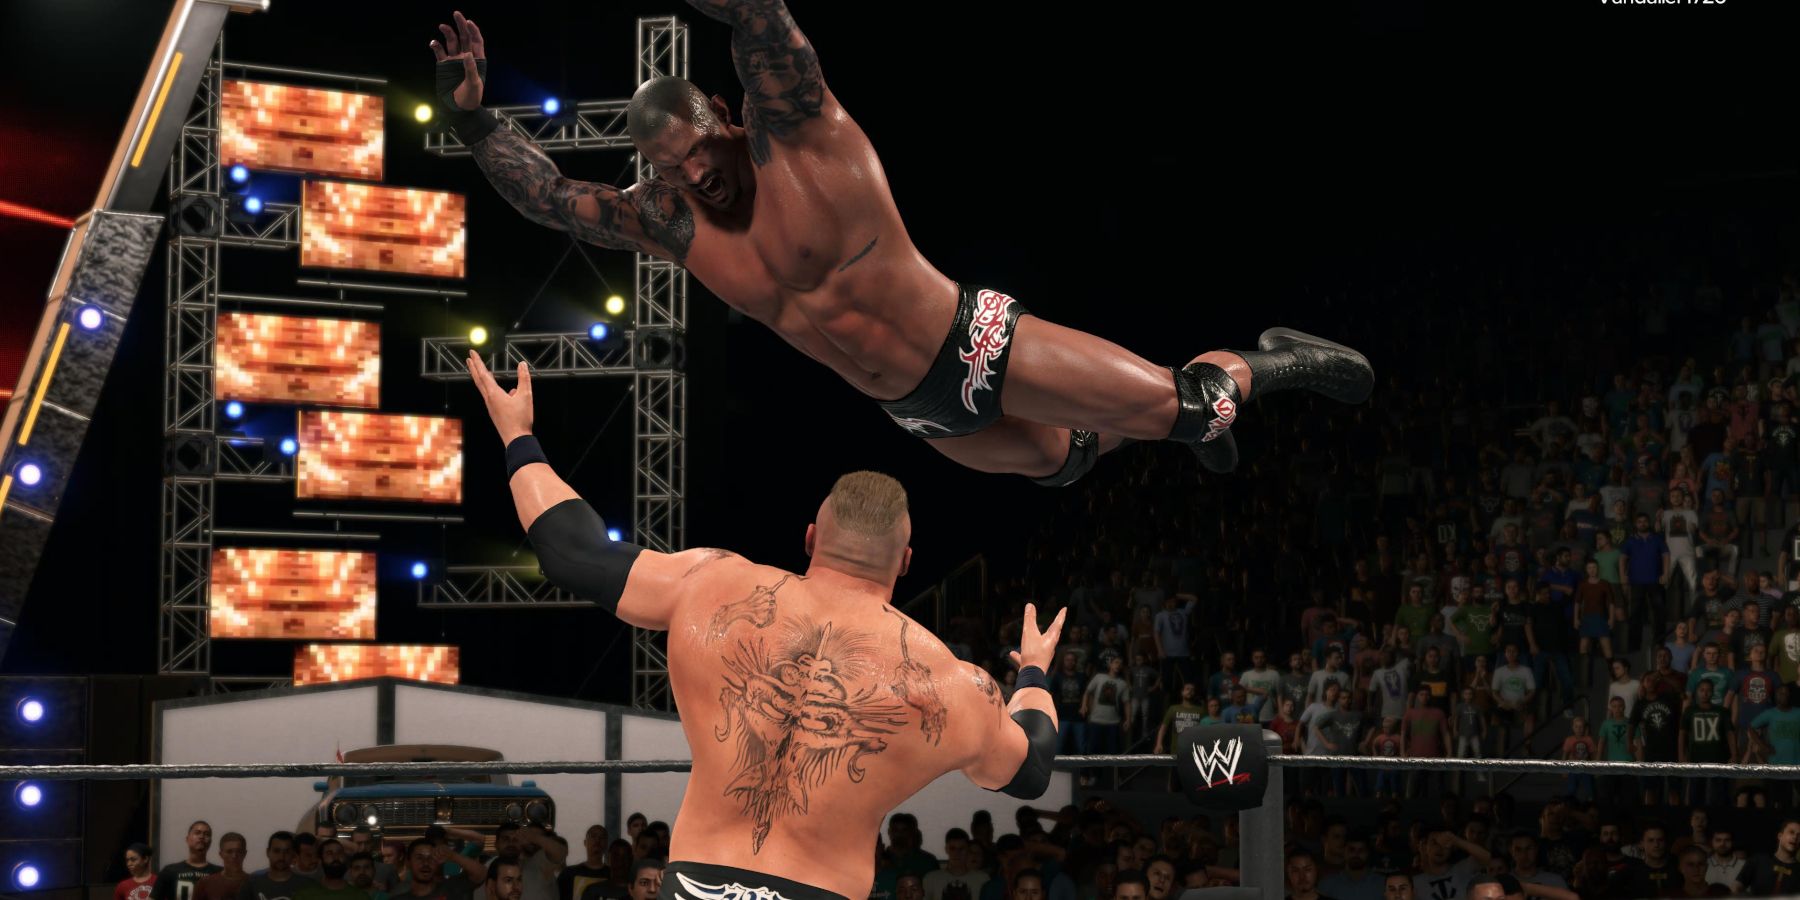 WWE 2k23 Brock Lesnar catching Randy Orton for the finisher